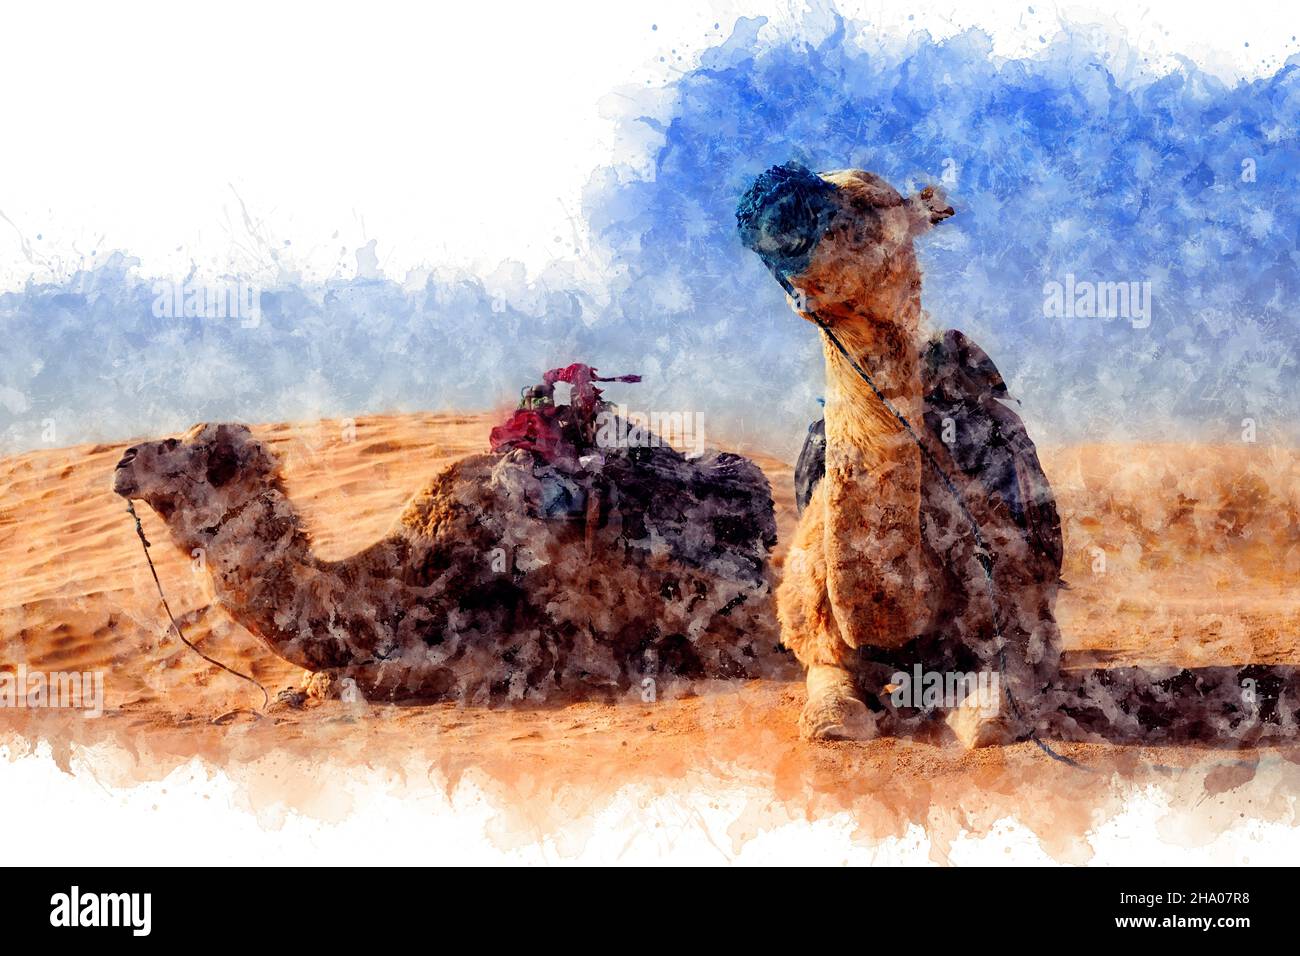 Watercolor drawing. Dromedary Camel sits on the sand in the Sahara Desert, resting. Stock Photo